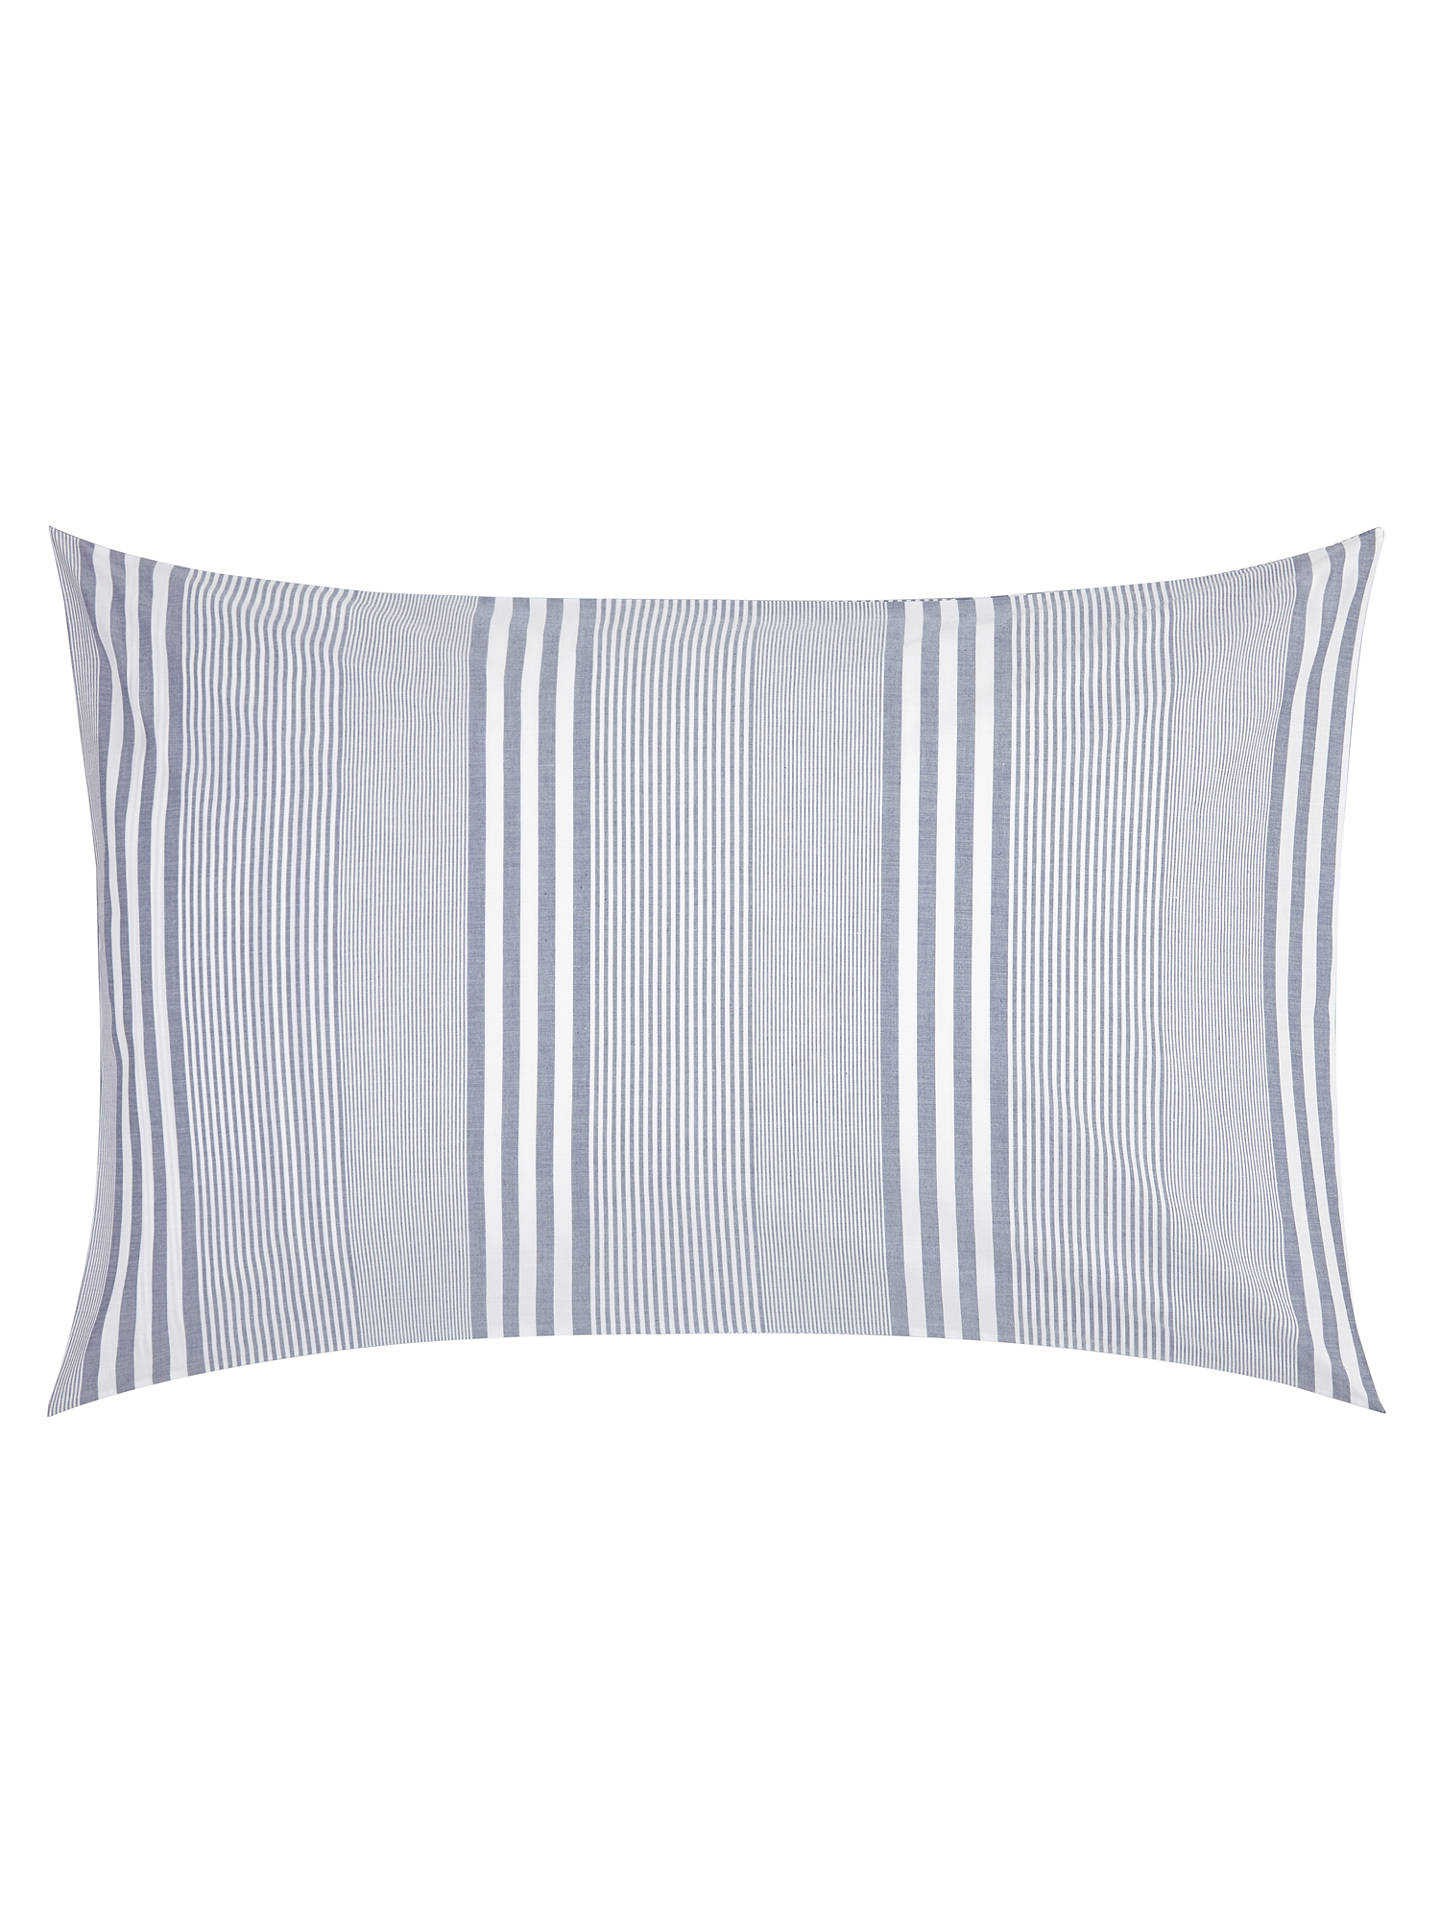 John Lewis Partners Textured And Decorative Variegated Stripe